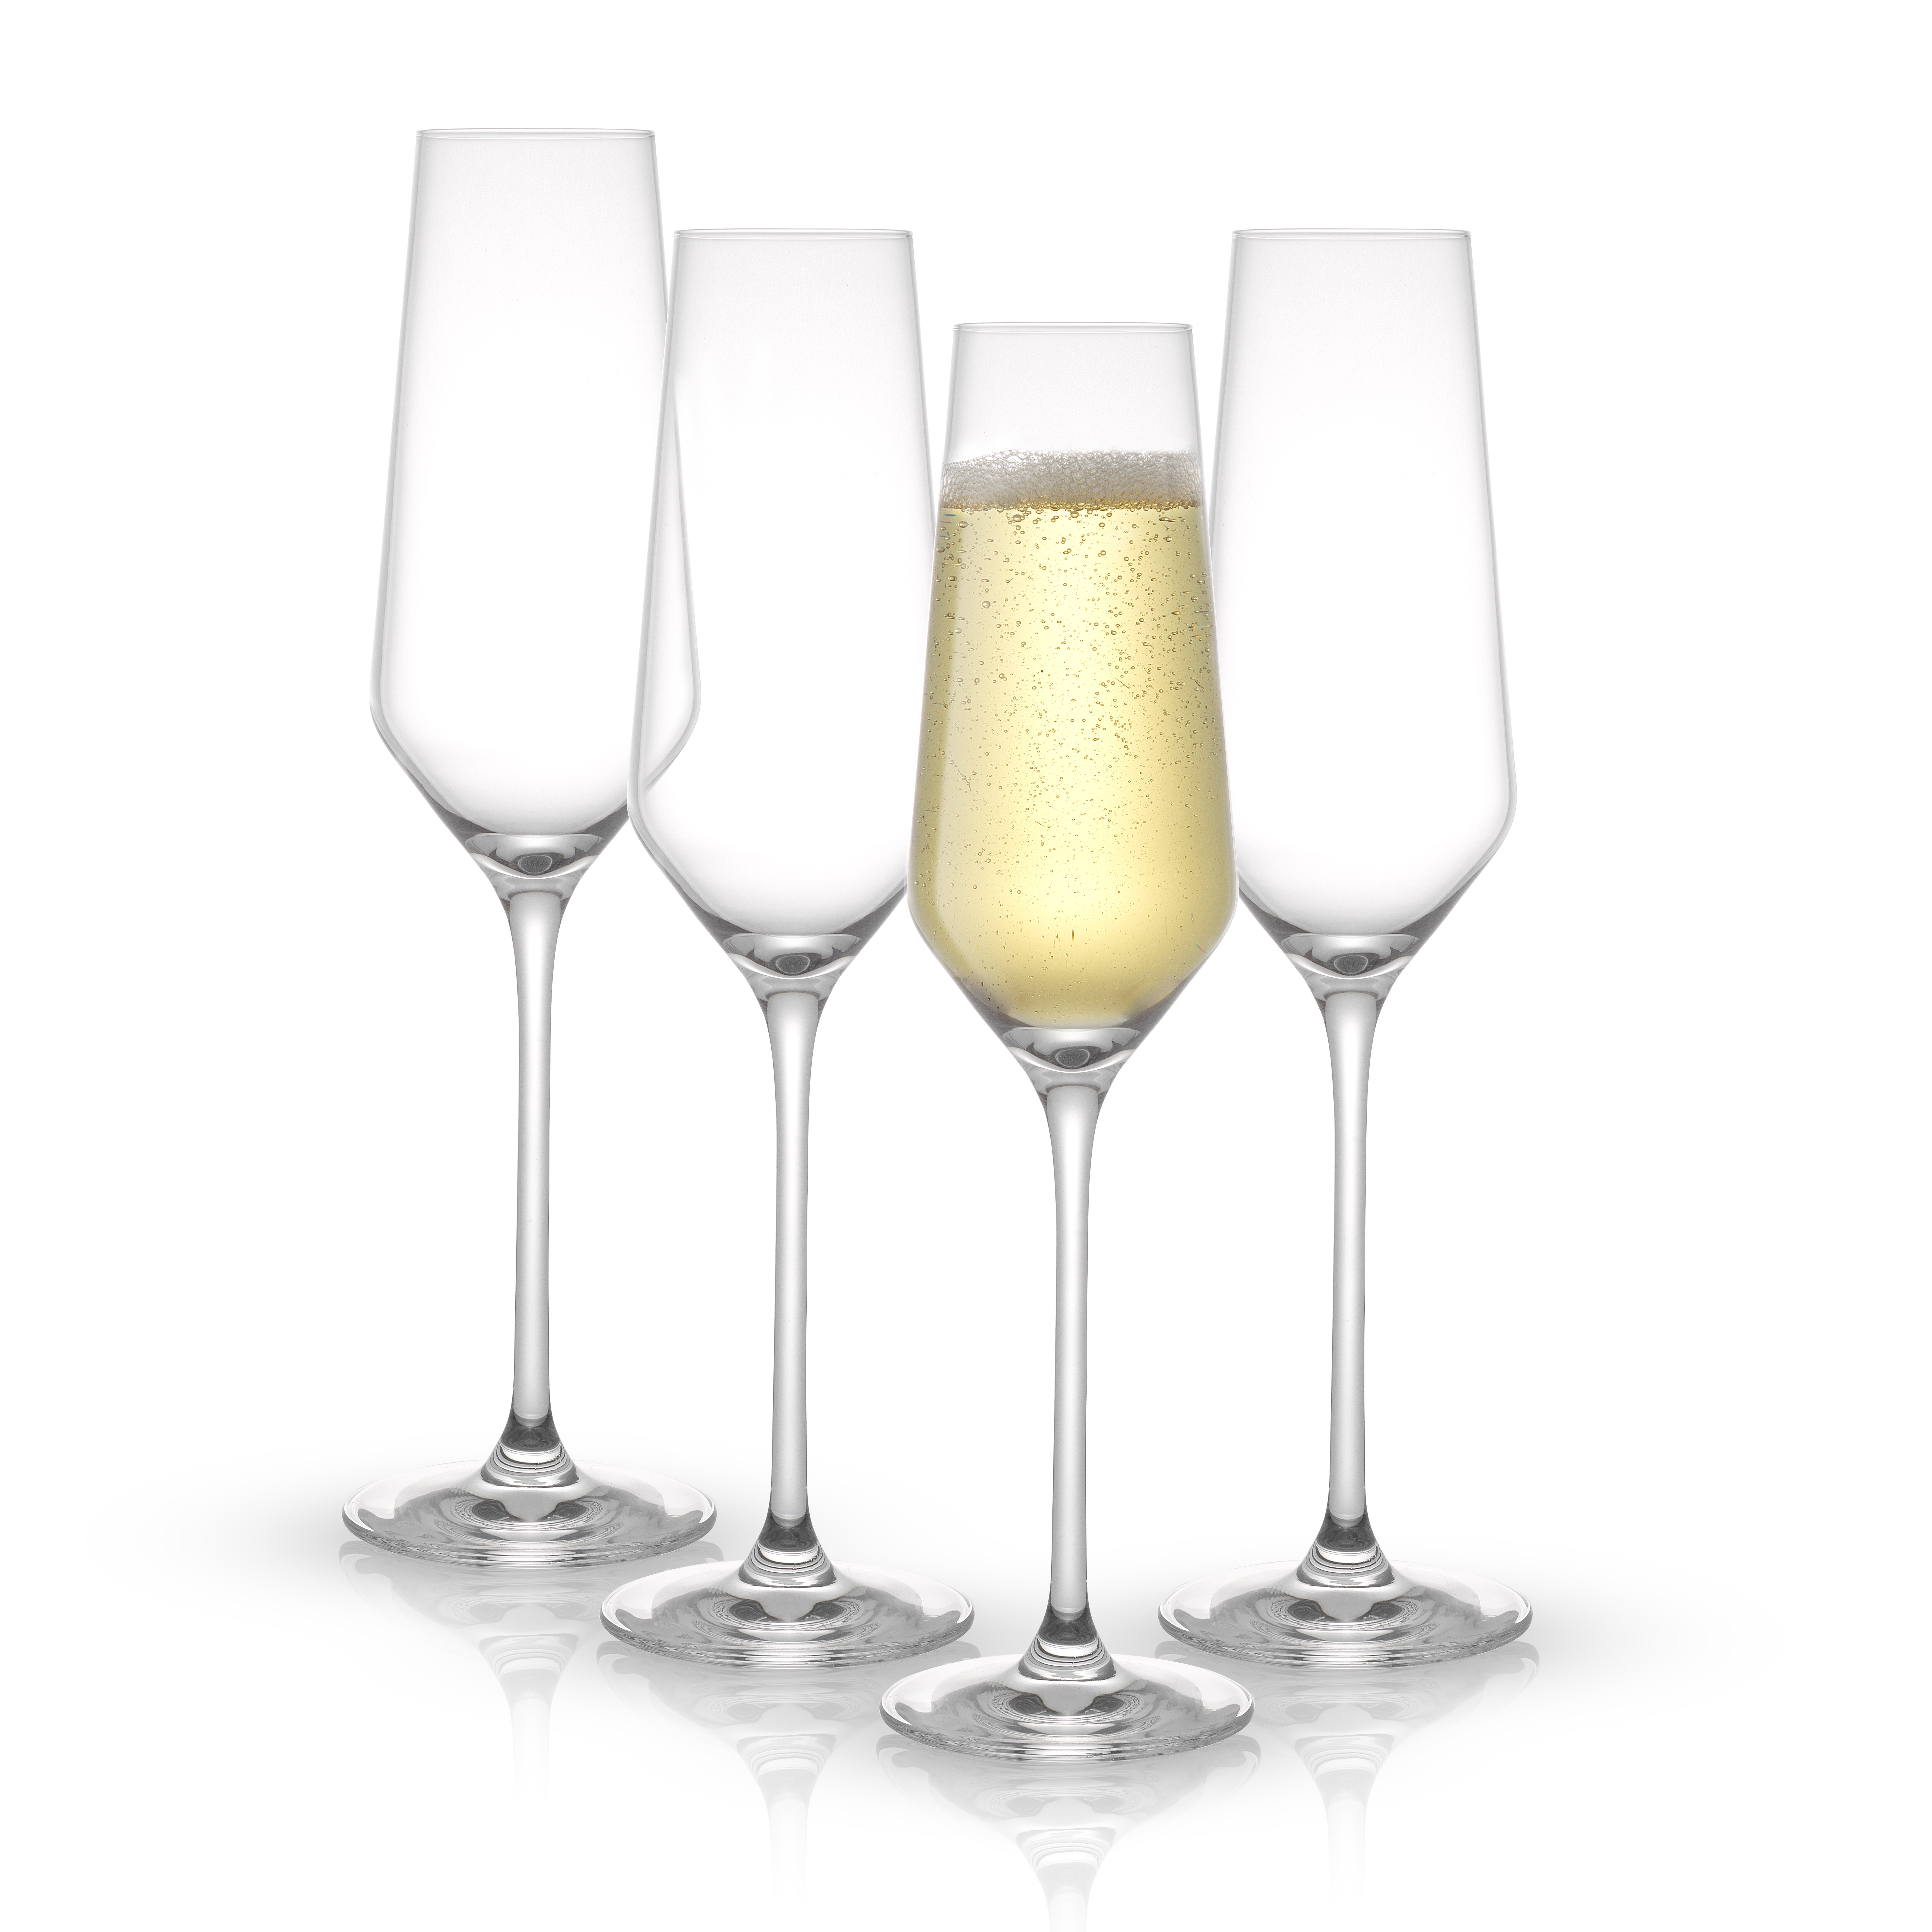 Machine Made Glass 100% LEAD FREE Crystal Champagne Flutes Glasses Set of 4 8 Ounce 